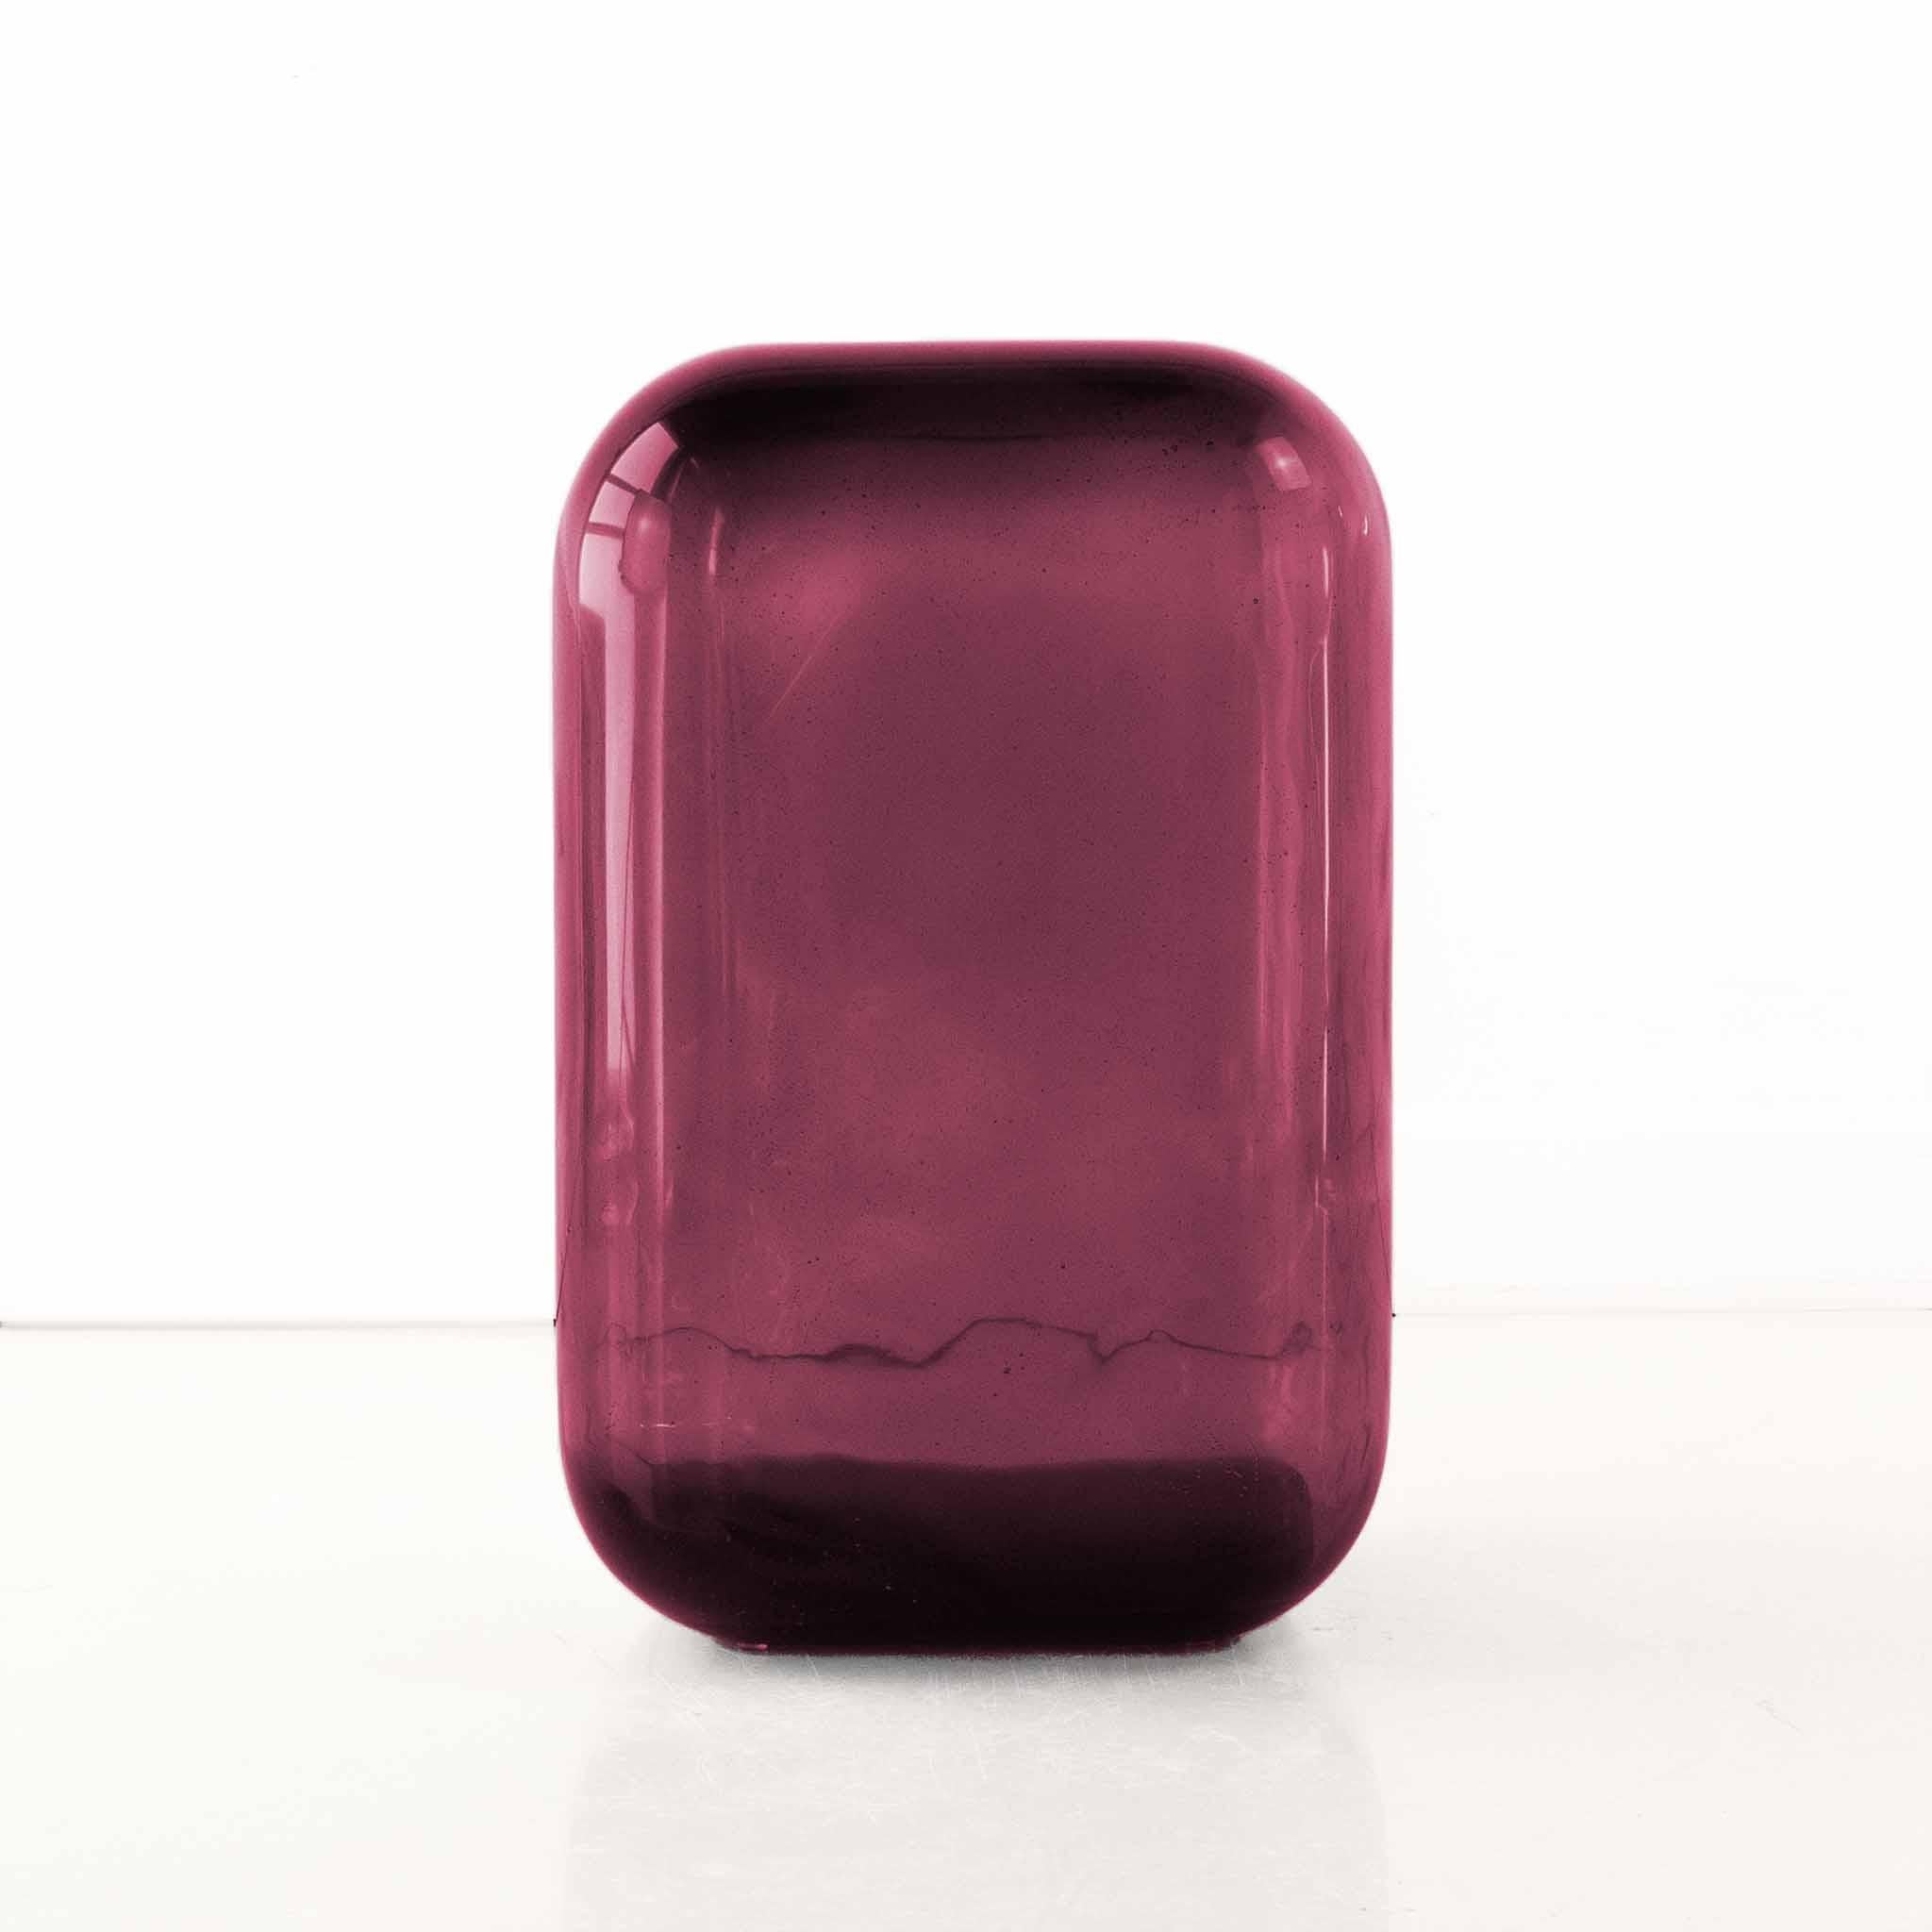 Ocean Oort Resin Side Table by creators of objects.
Materials: Resin, pigment
DImensions: W 36 x D 36 x H 56 cm
Also Available: Tourmaline, Bordeaux, Spice, Ochre, Forest, Ocean, Twilight, Rock, Lilac, Cerise, Coral Spice, Honey, Moss, Surf, Eve,